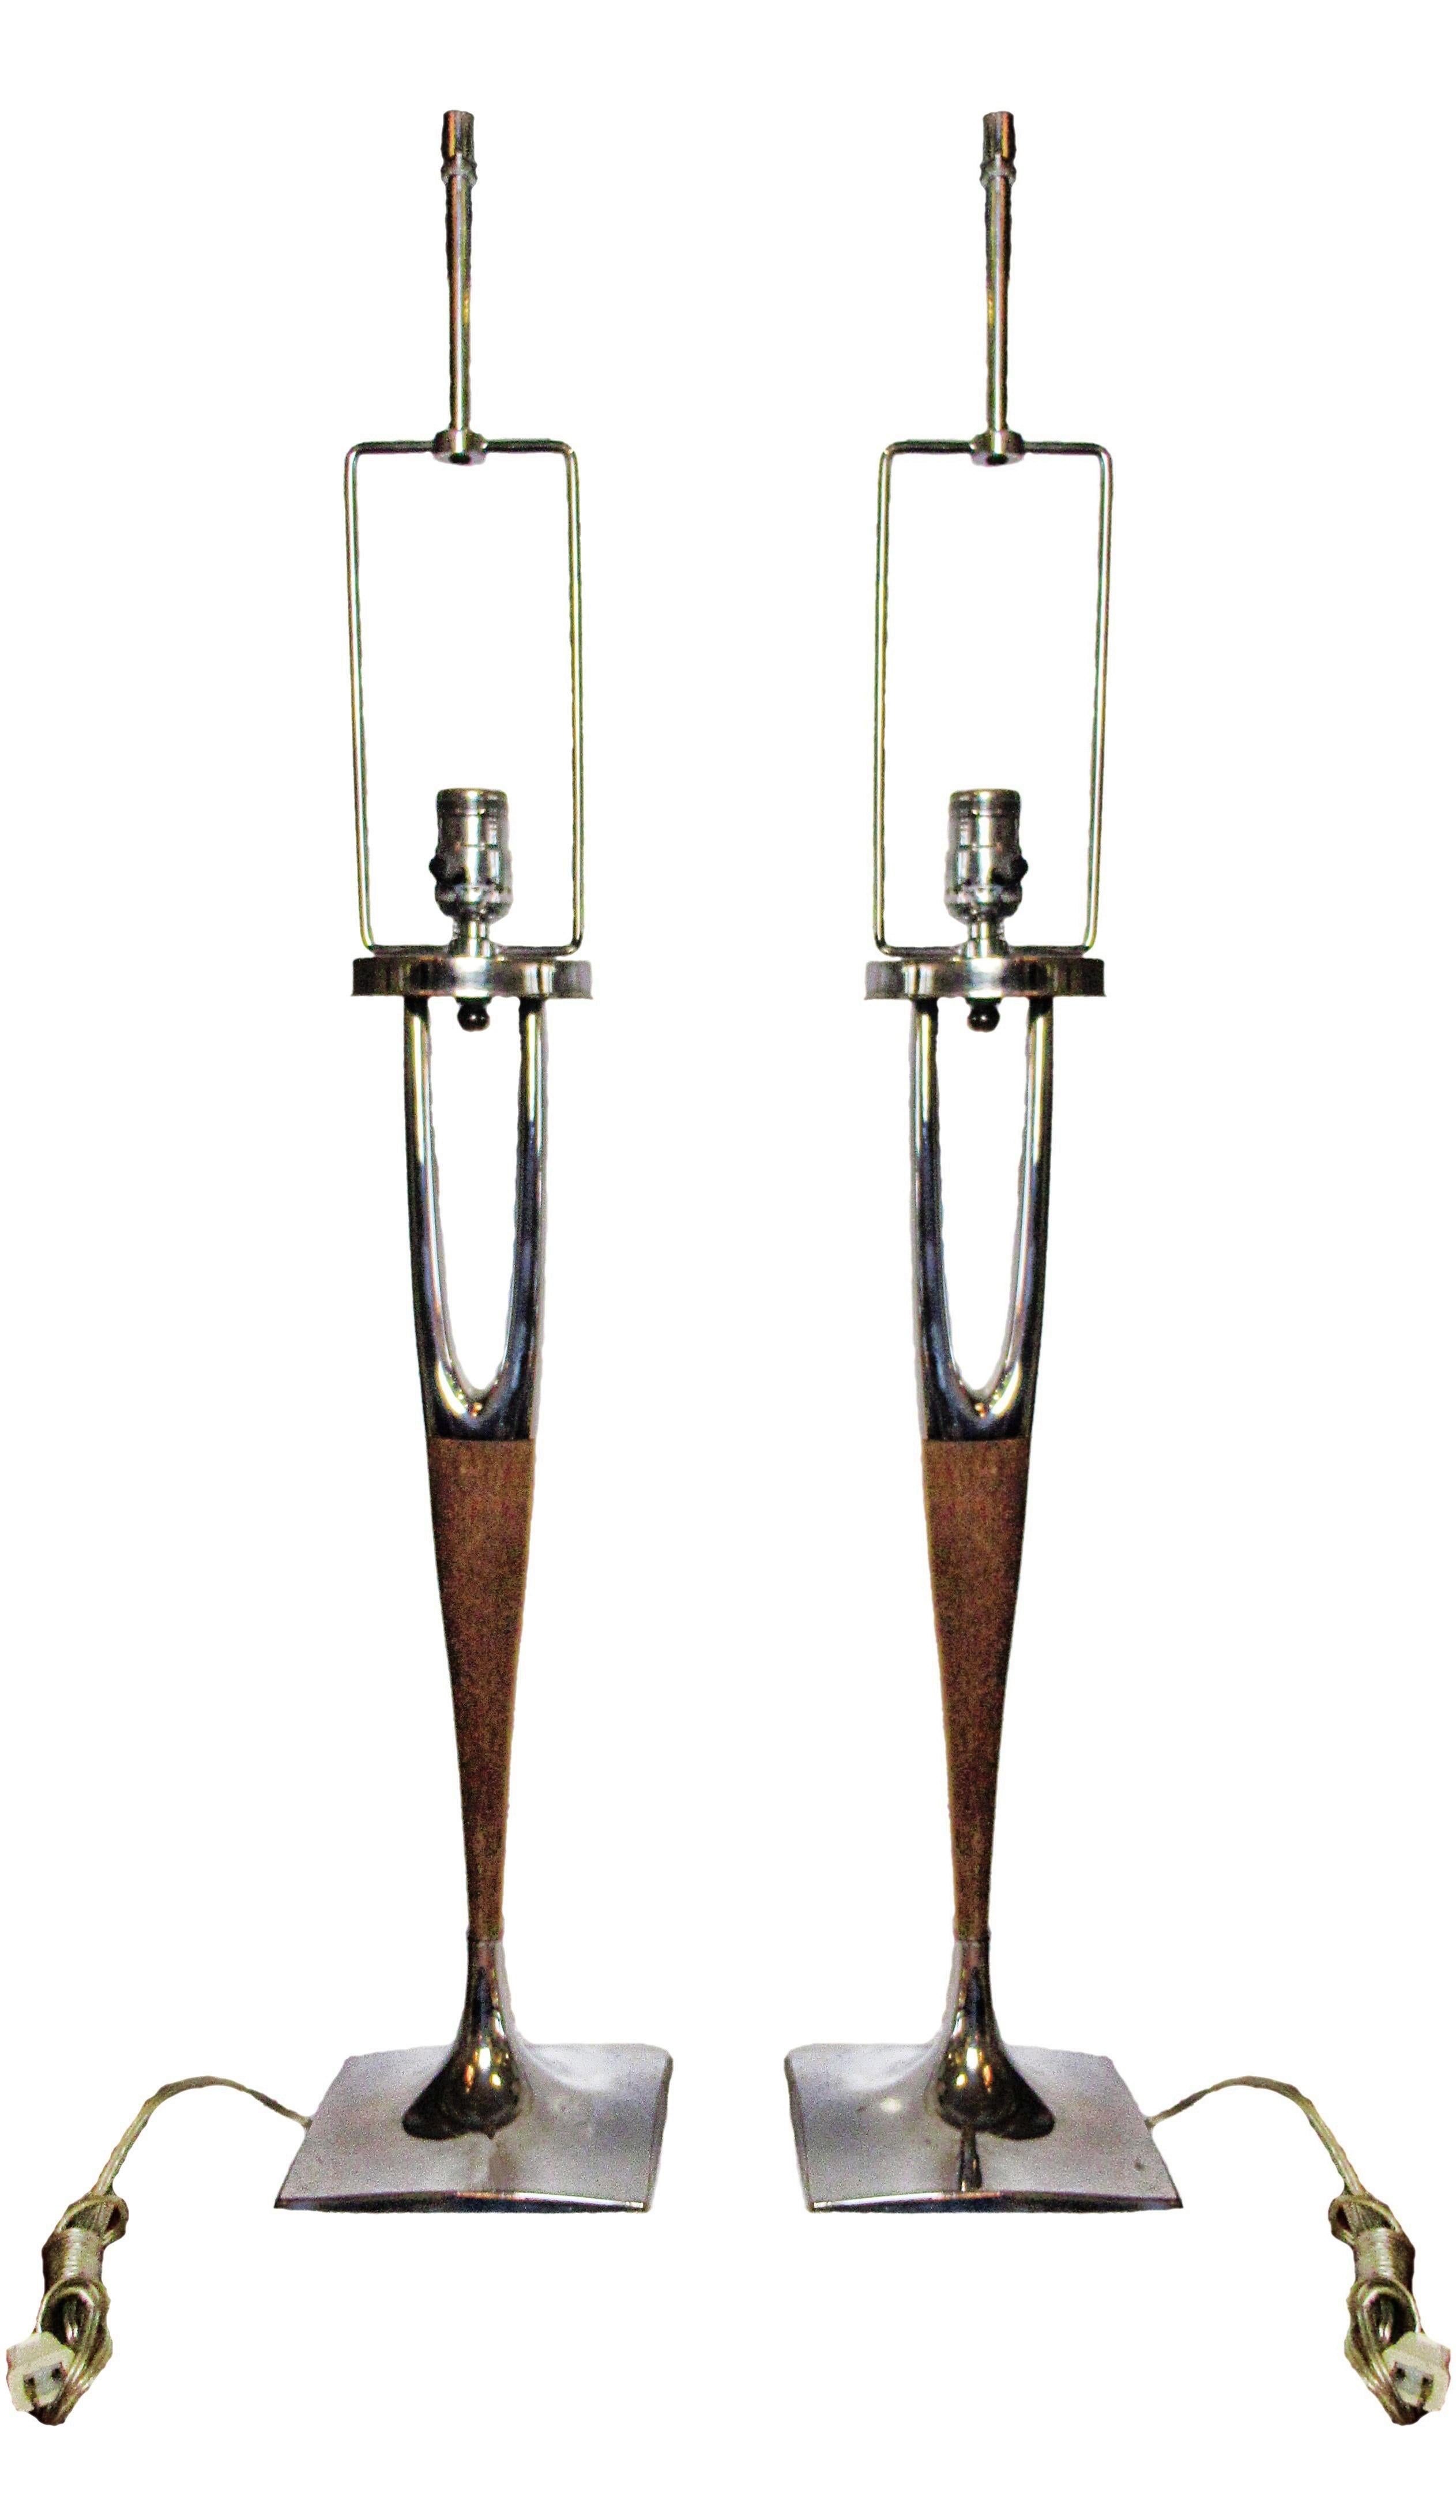 Pair of Modern Table Lamps, Mahogany and Polished Nickel, rewired and fully restored